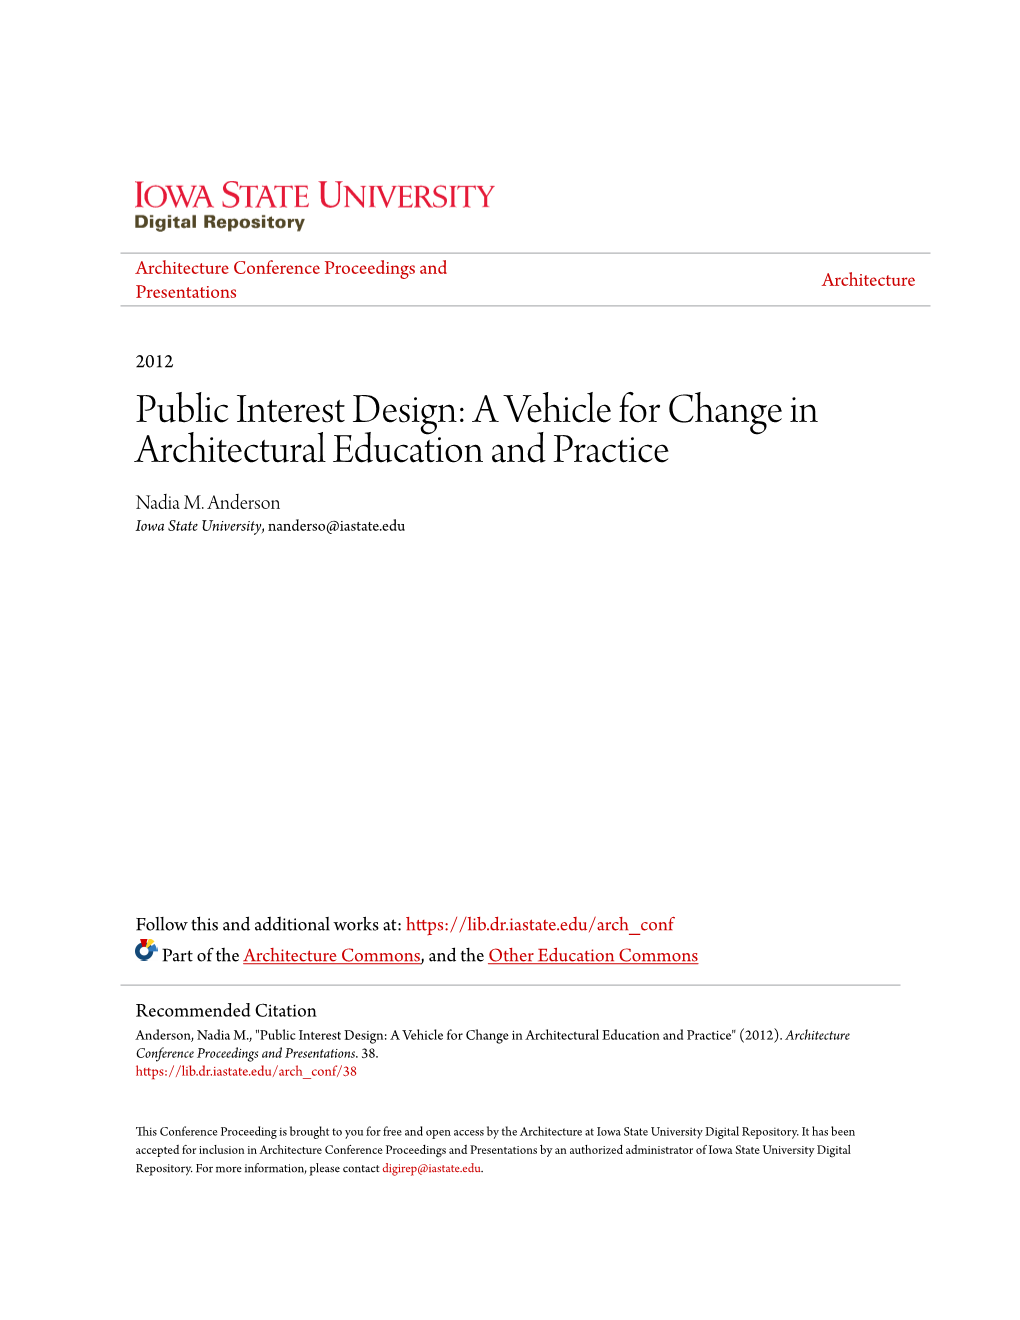 Public Interest Design: a Vehicle for Change in Architectural Education and Practice Nadia M